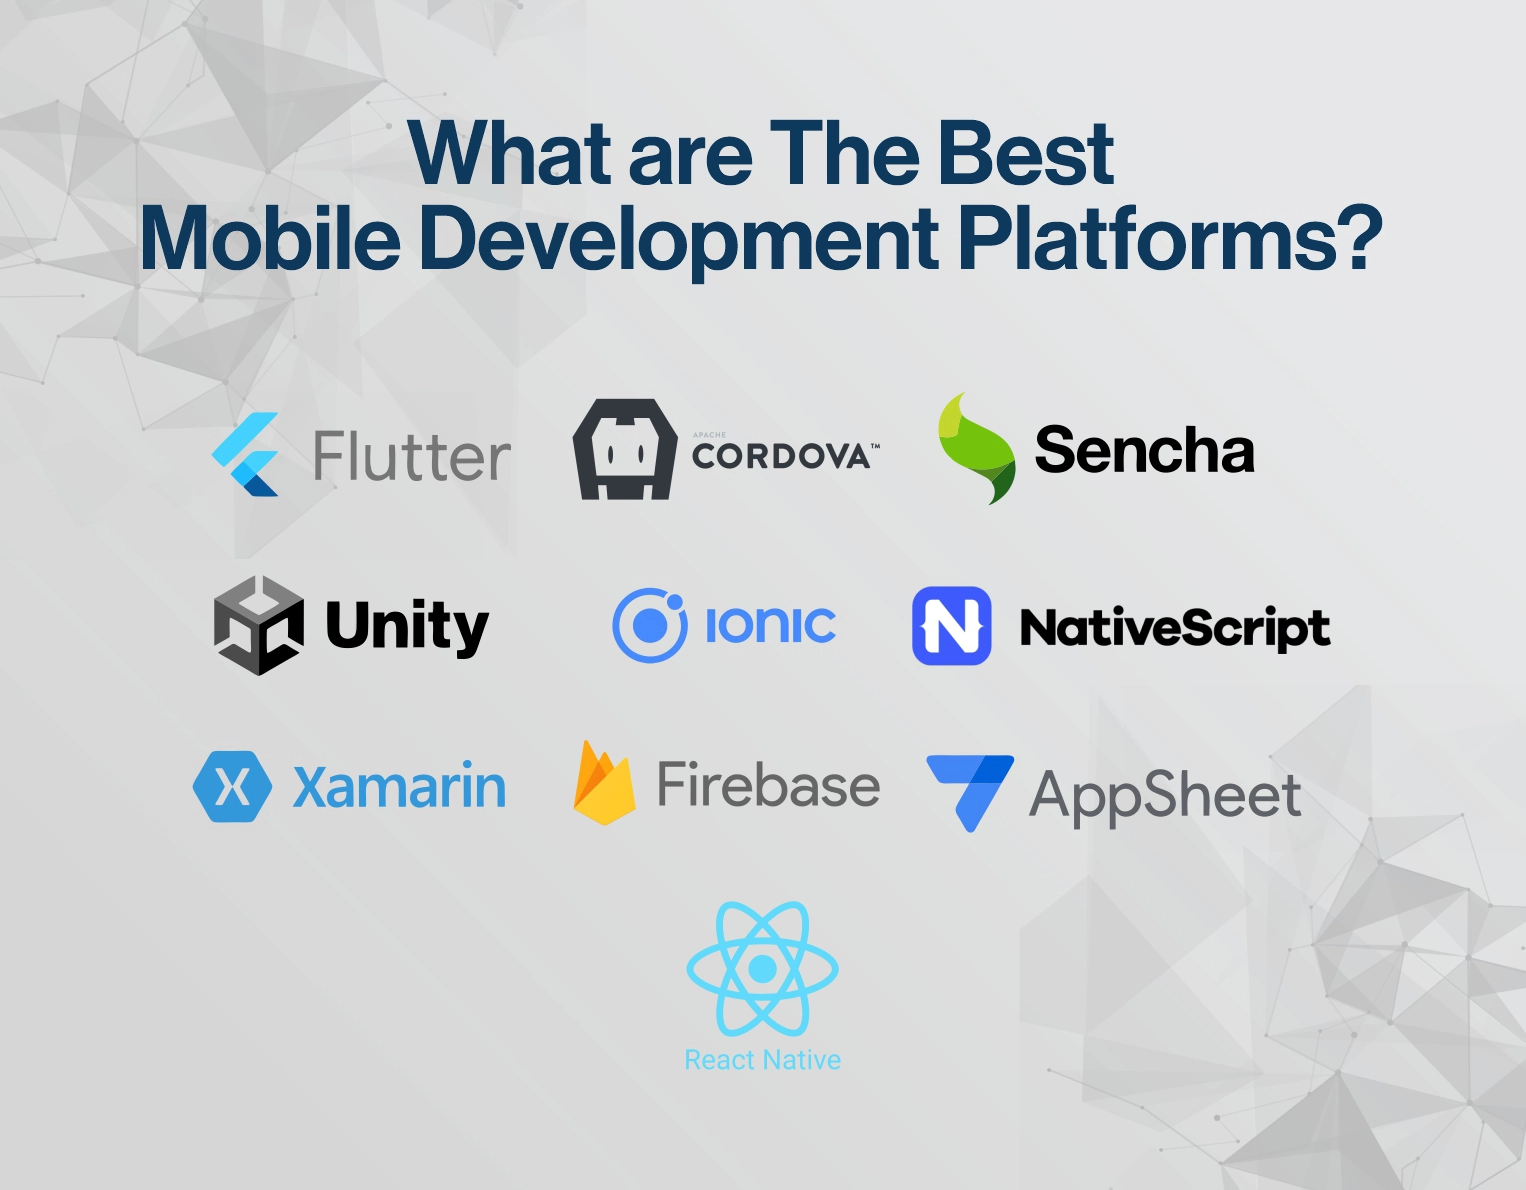 What are the Best Mobile Development Platforms